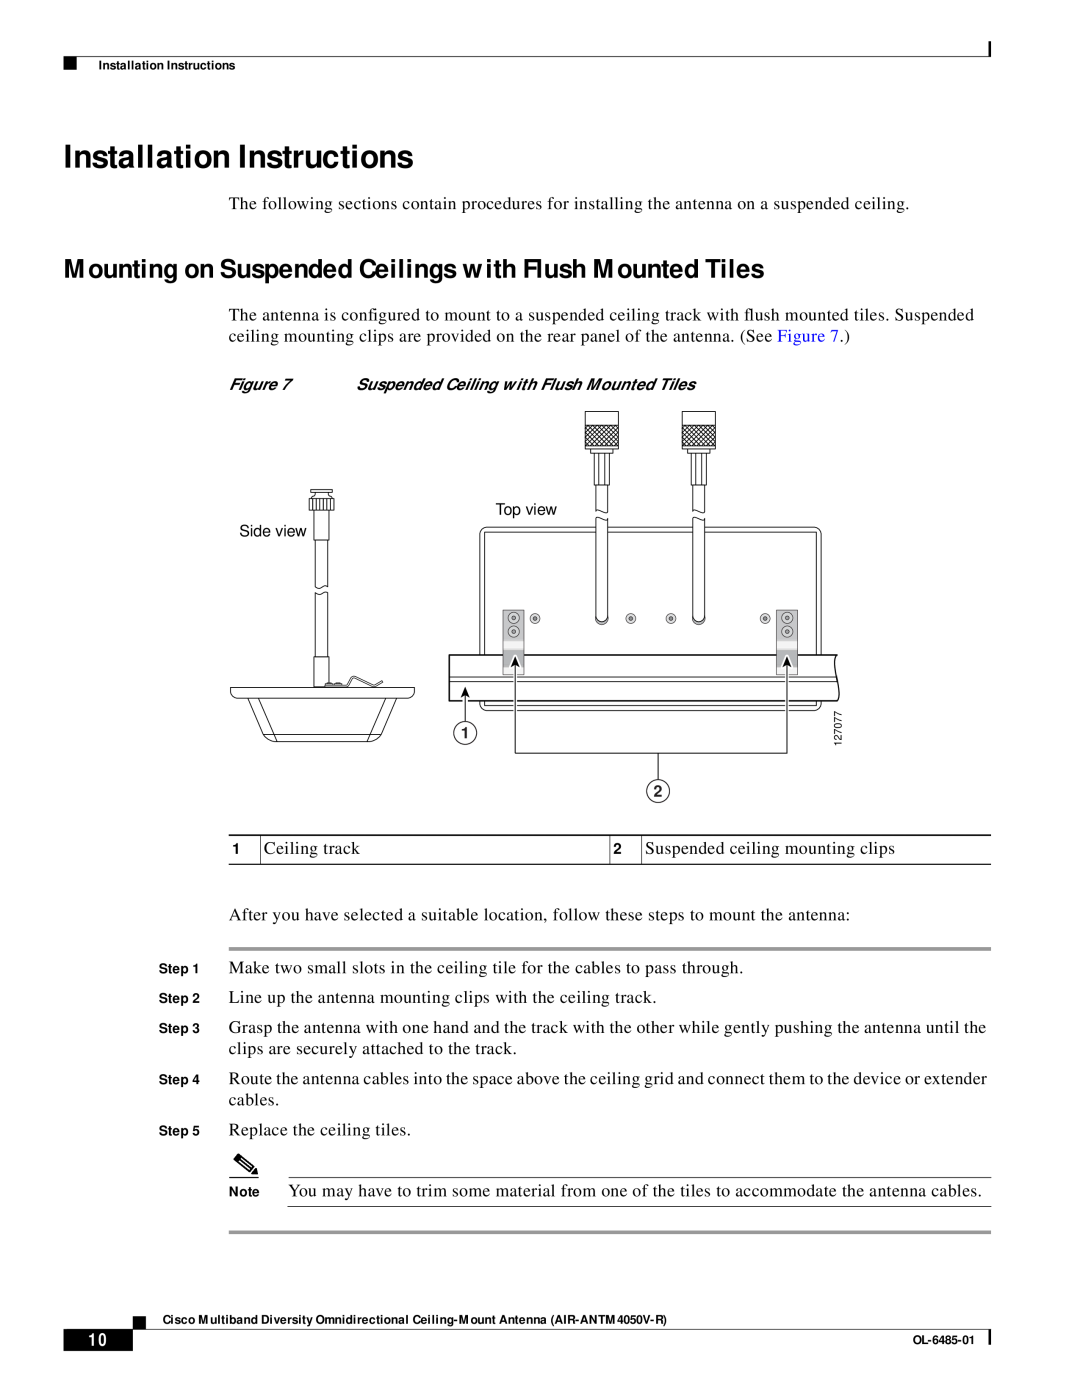 Cisco Systems AIR-ANTM4050V-R warranty Installation Instructions, Mounting on Suspended Ceilings with Flush Mounted Tiles 